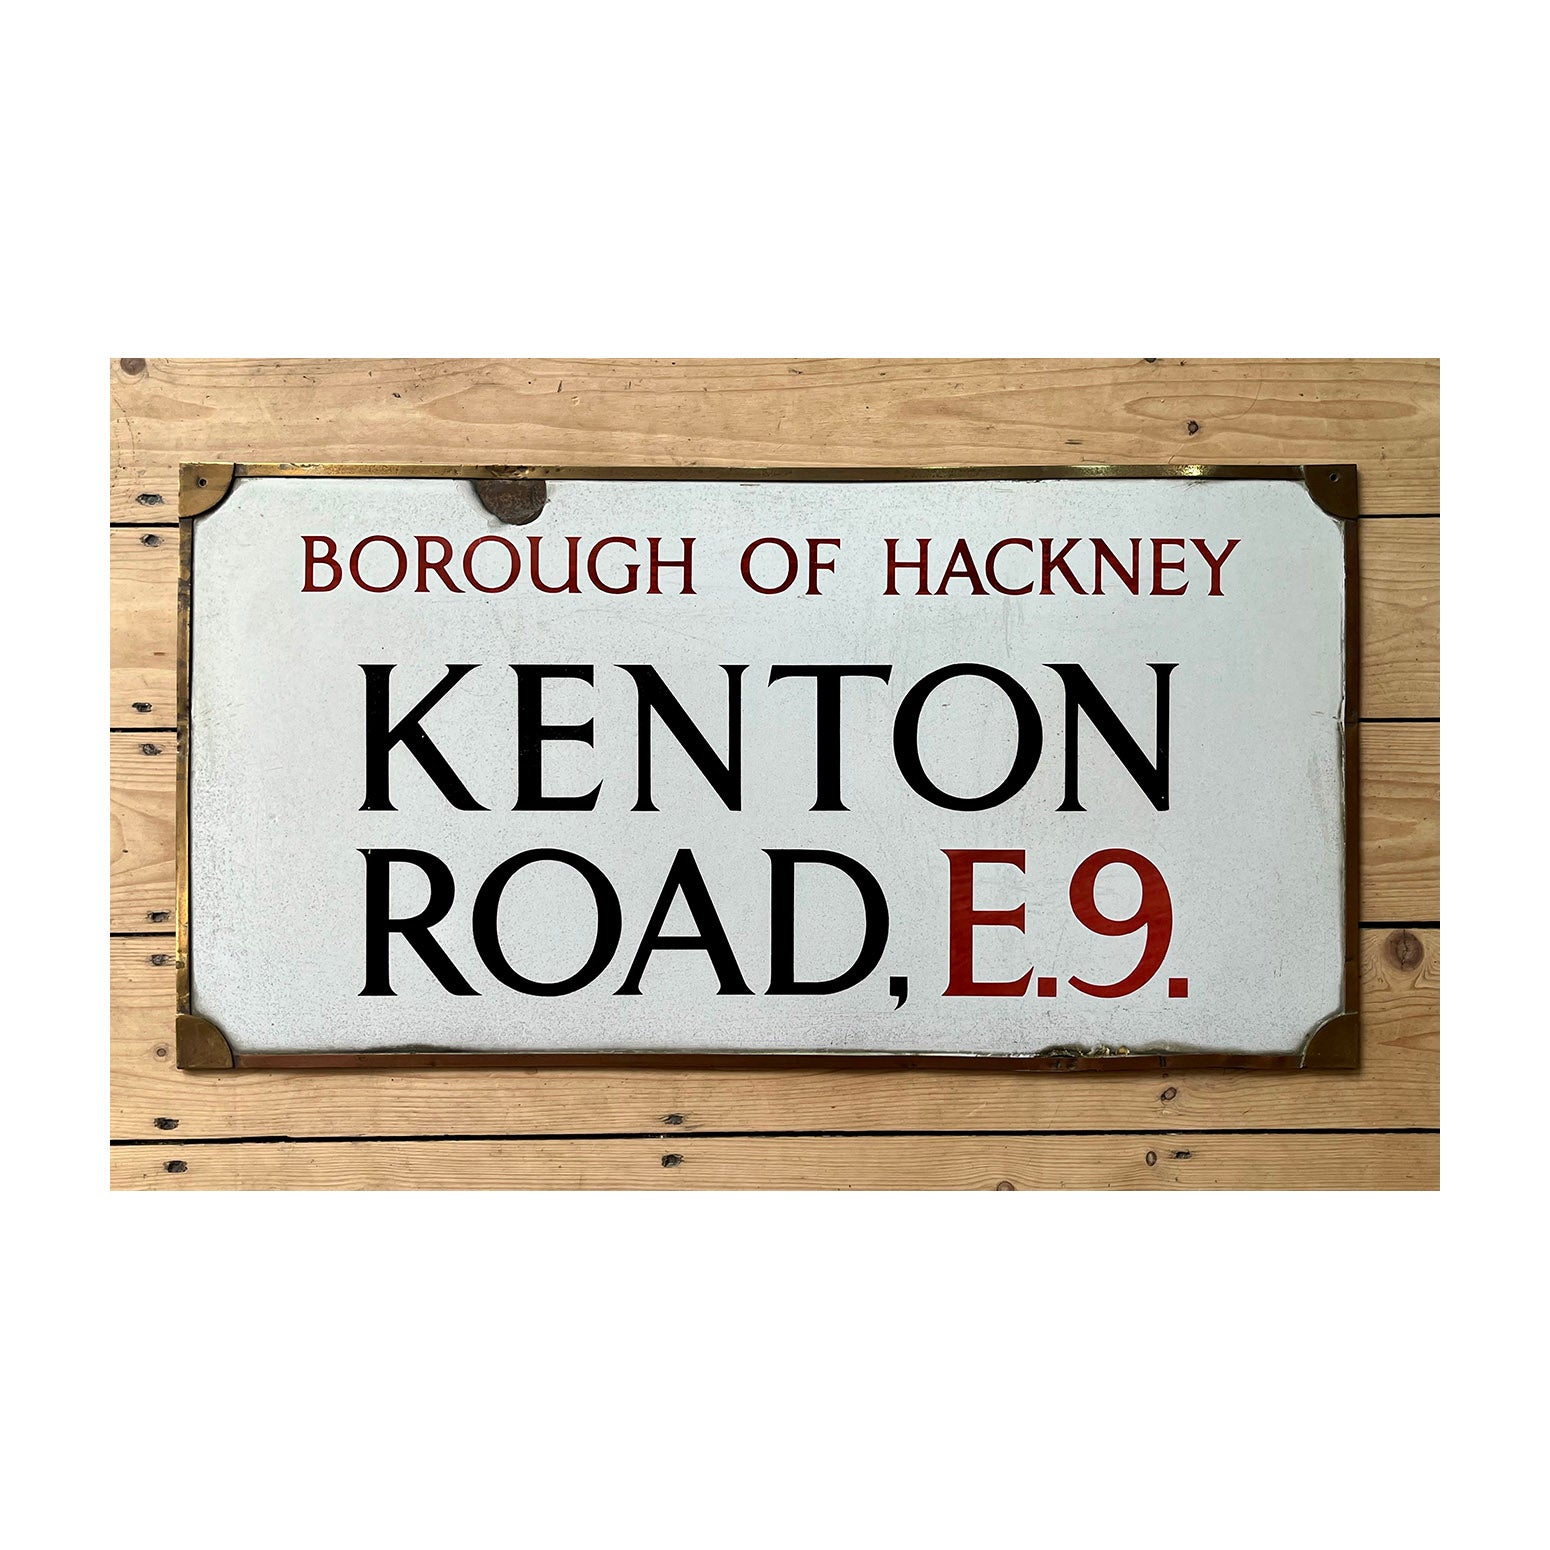 original pre-war enamel street sign, Kenton Road, Borough of Hackney E9, in original bronze frame. This is the early type of London street sign, with serifed lettering